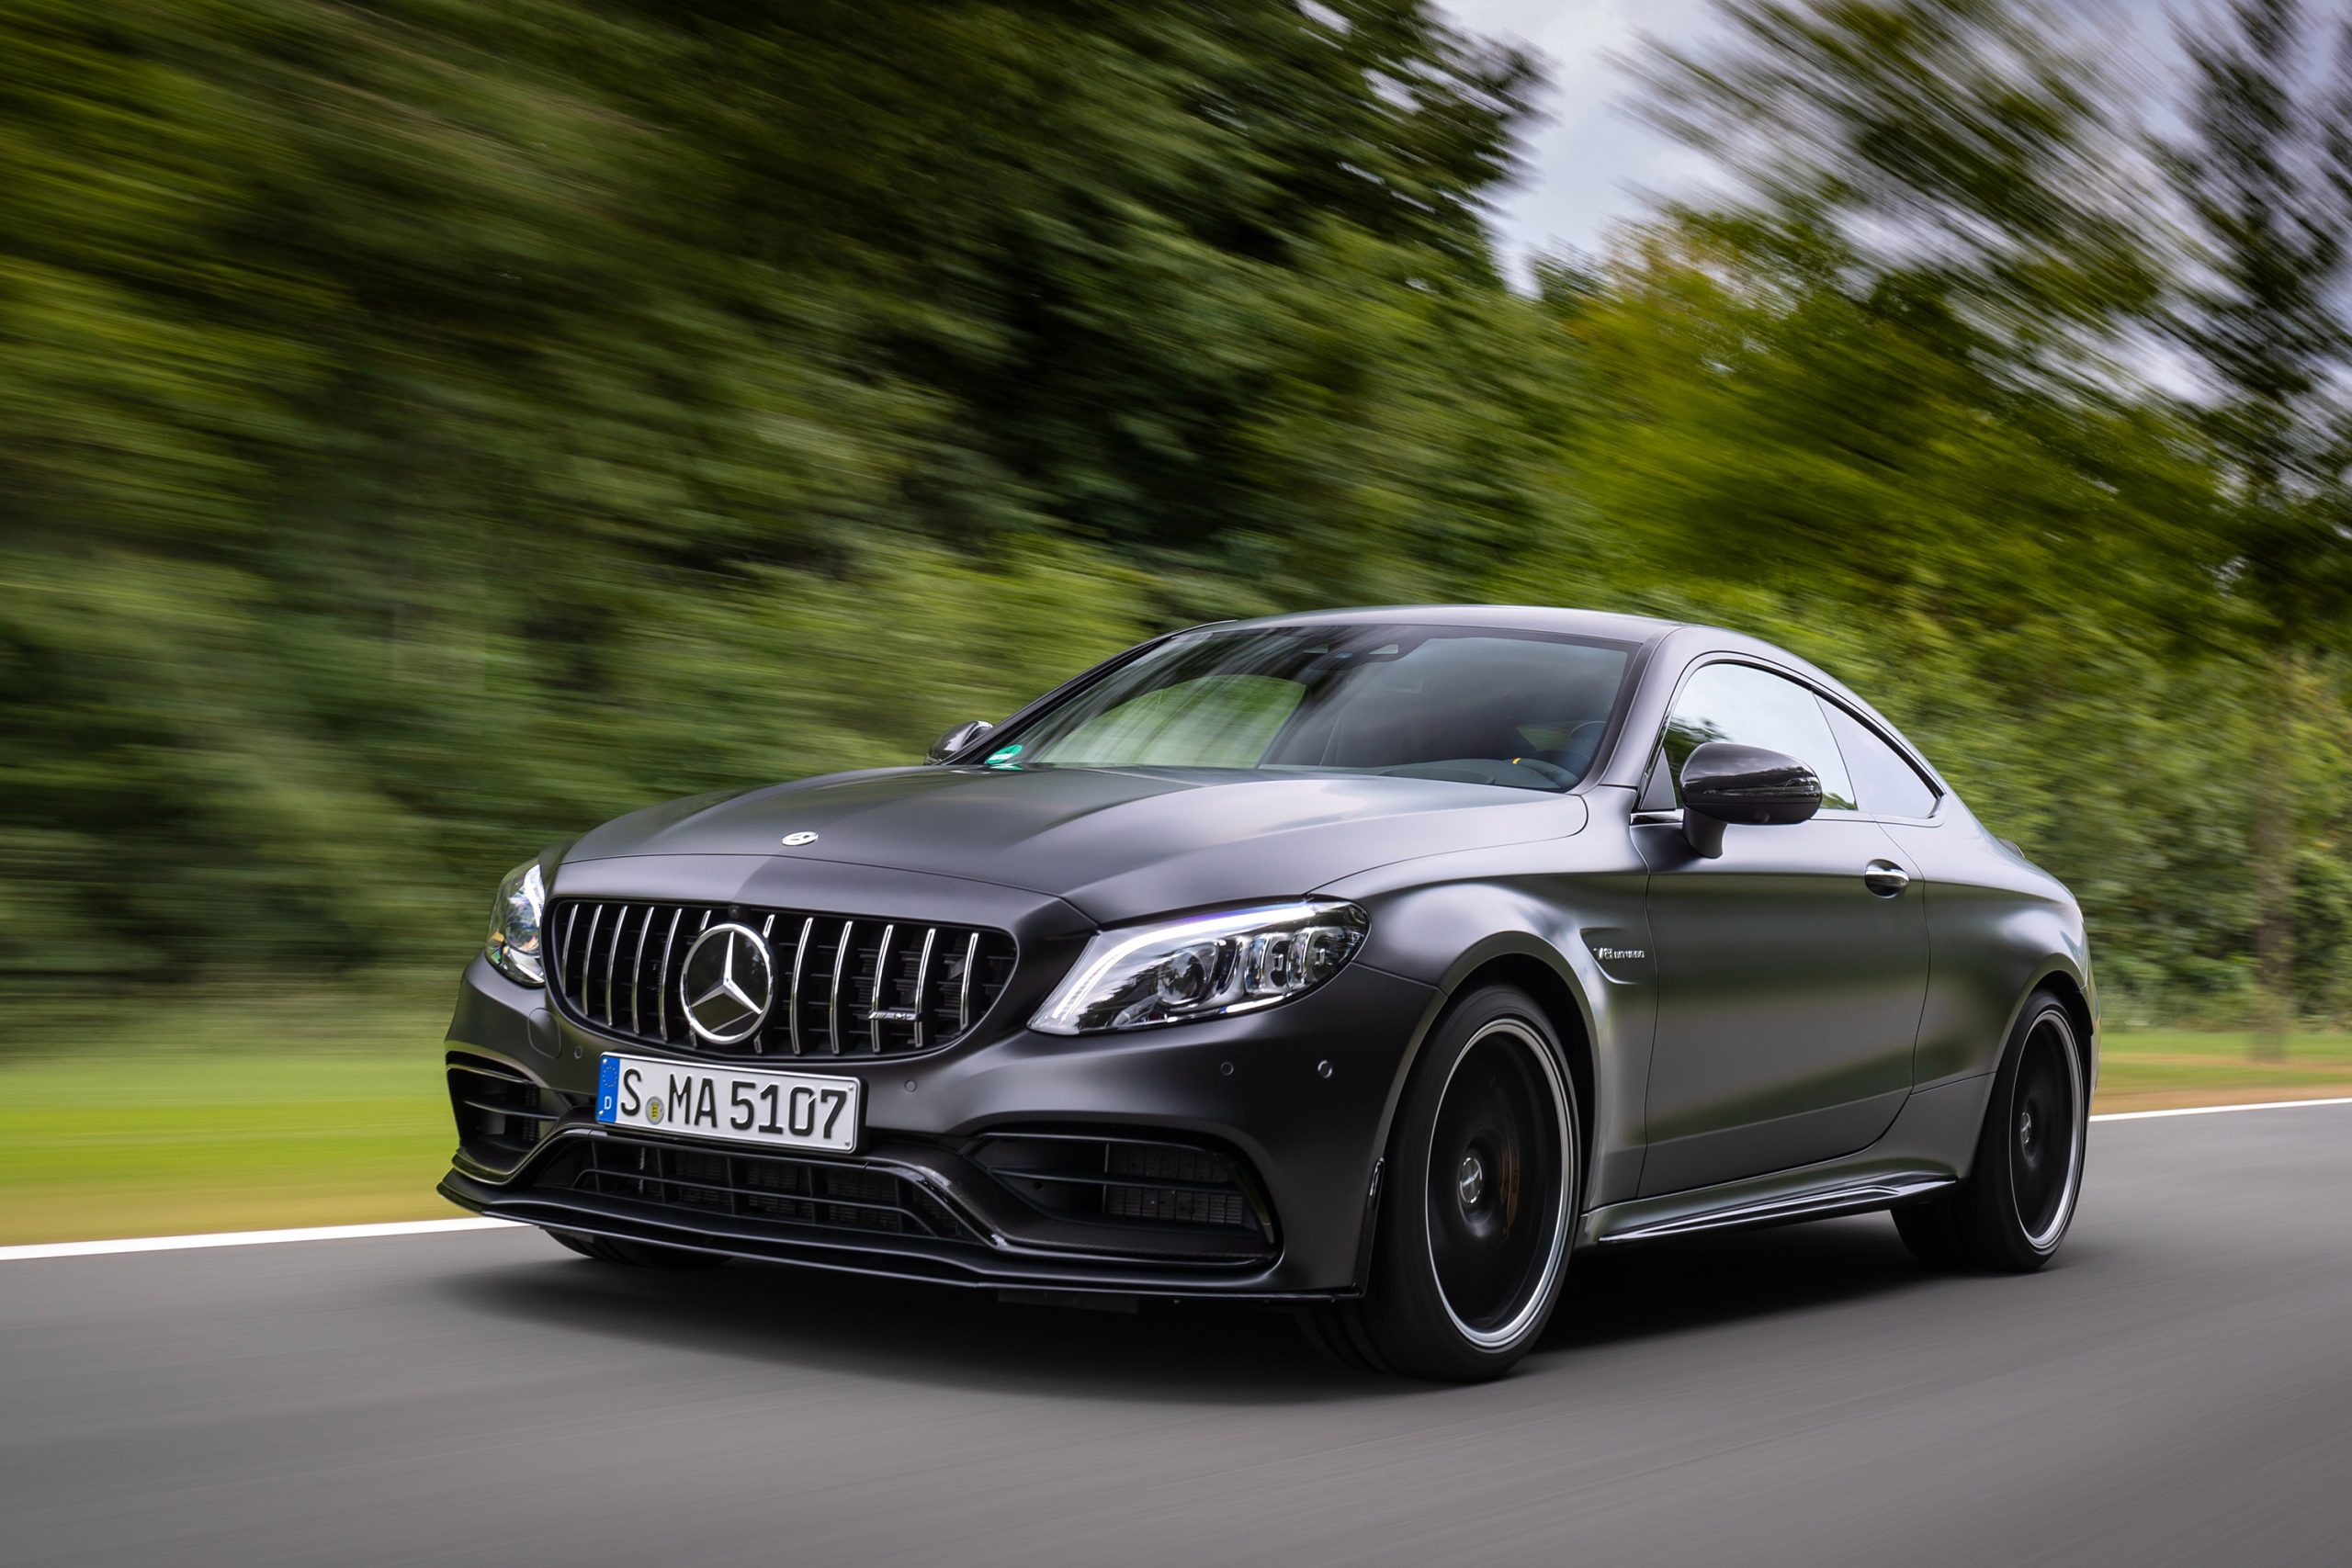 Mercedes-Amg C 63 S Wallpapers